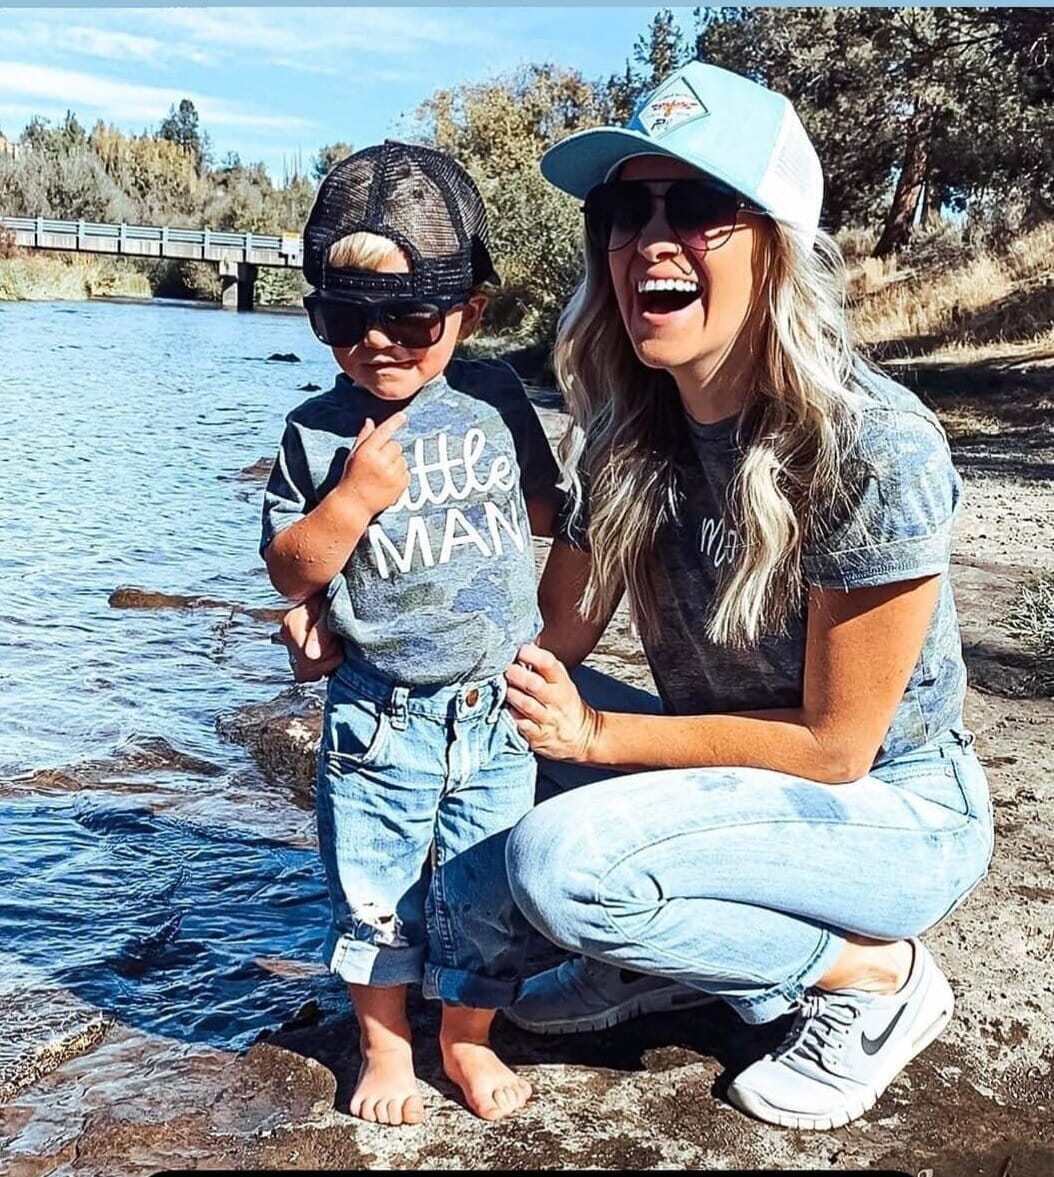 A child and mom at a river wearing matching camo outdoorsy shirts